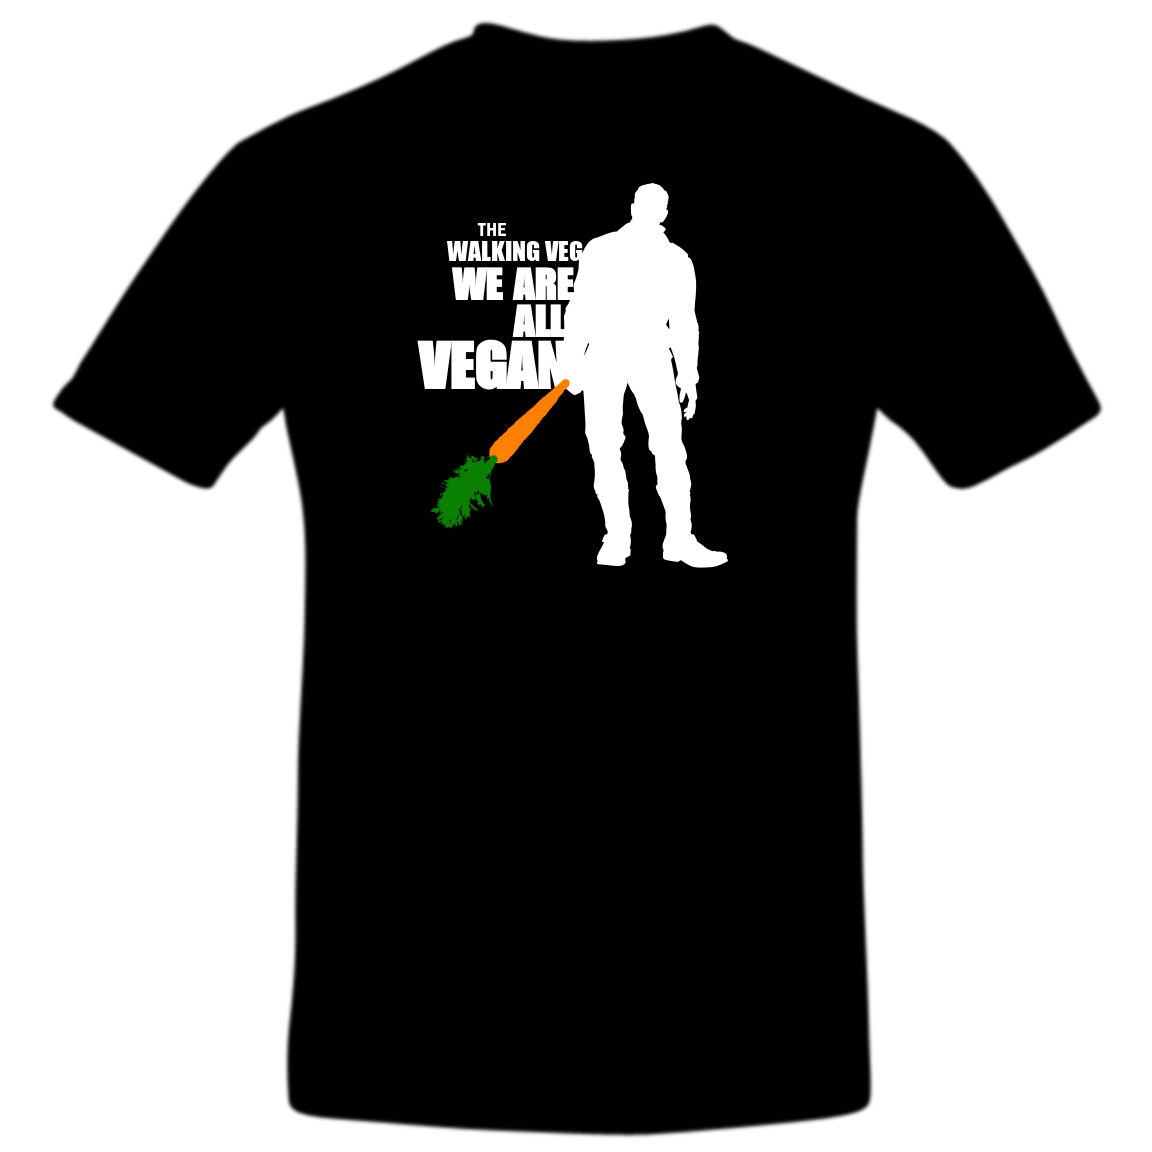 We Are All Vegan T Shirt in Black